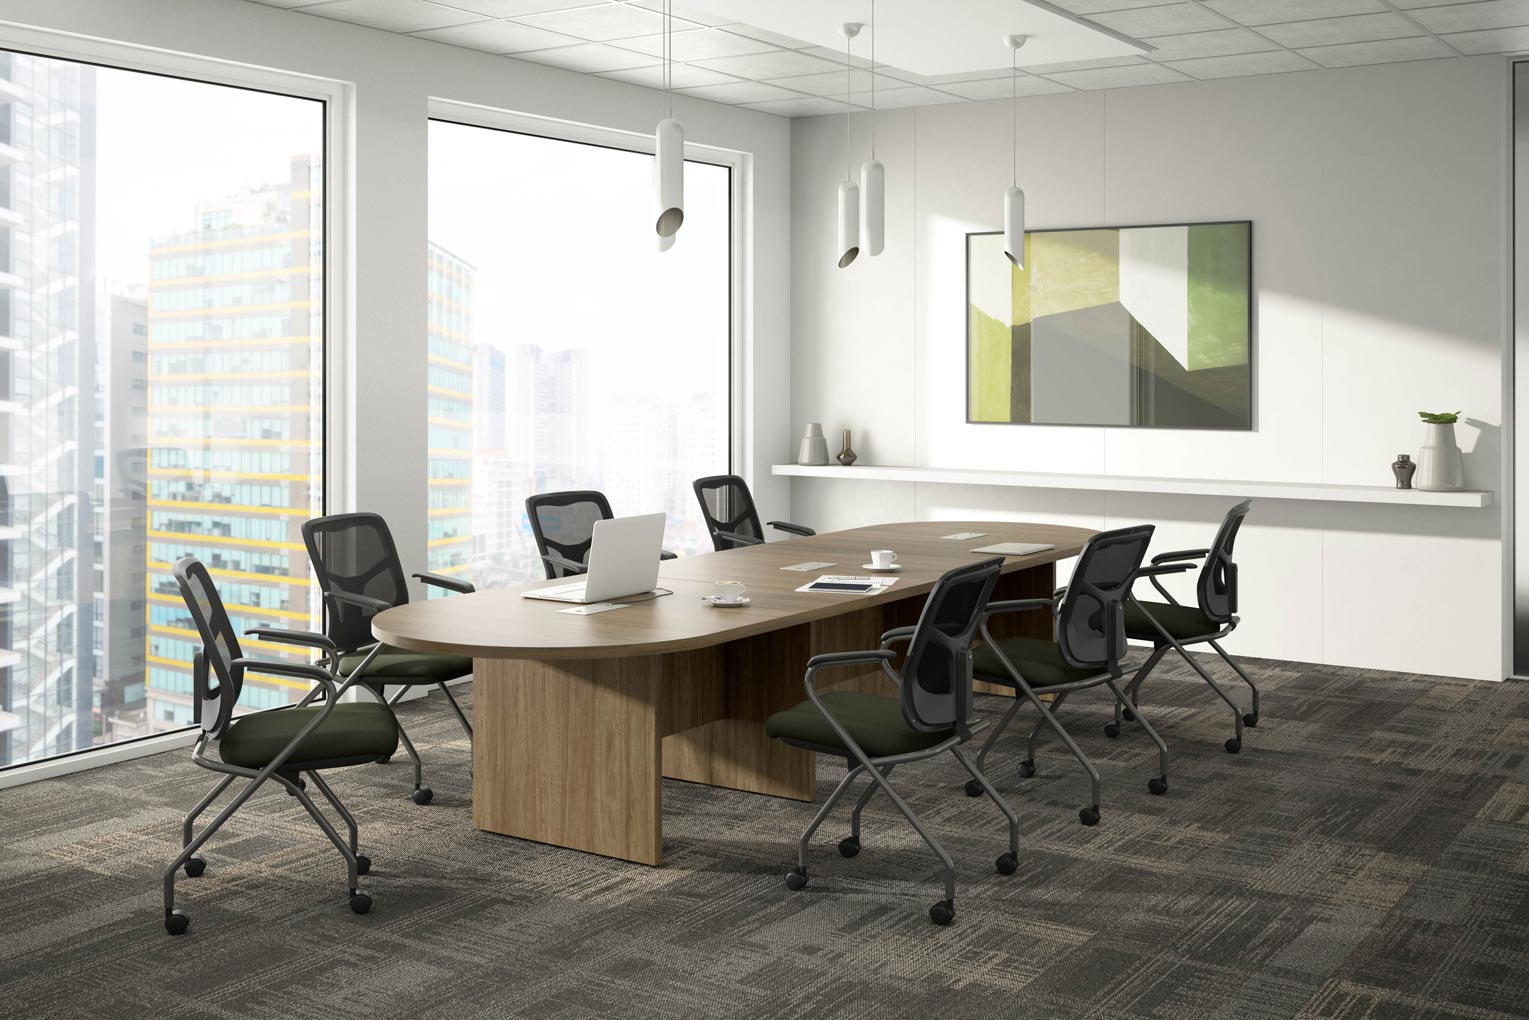 Racetrack Classic Conference and Boardroom Table with Modern Walnut Finish